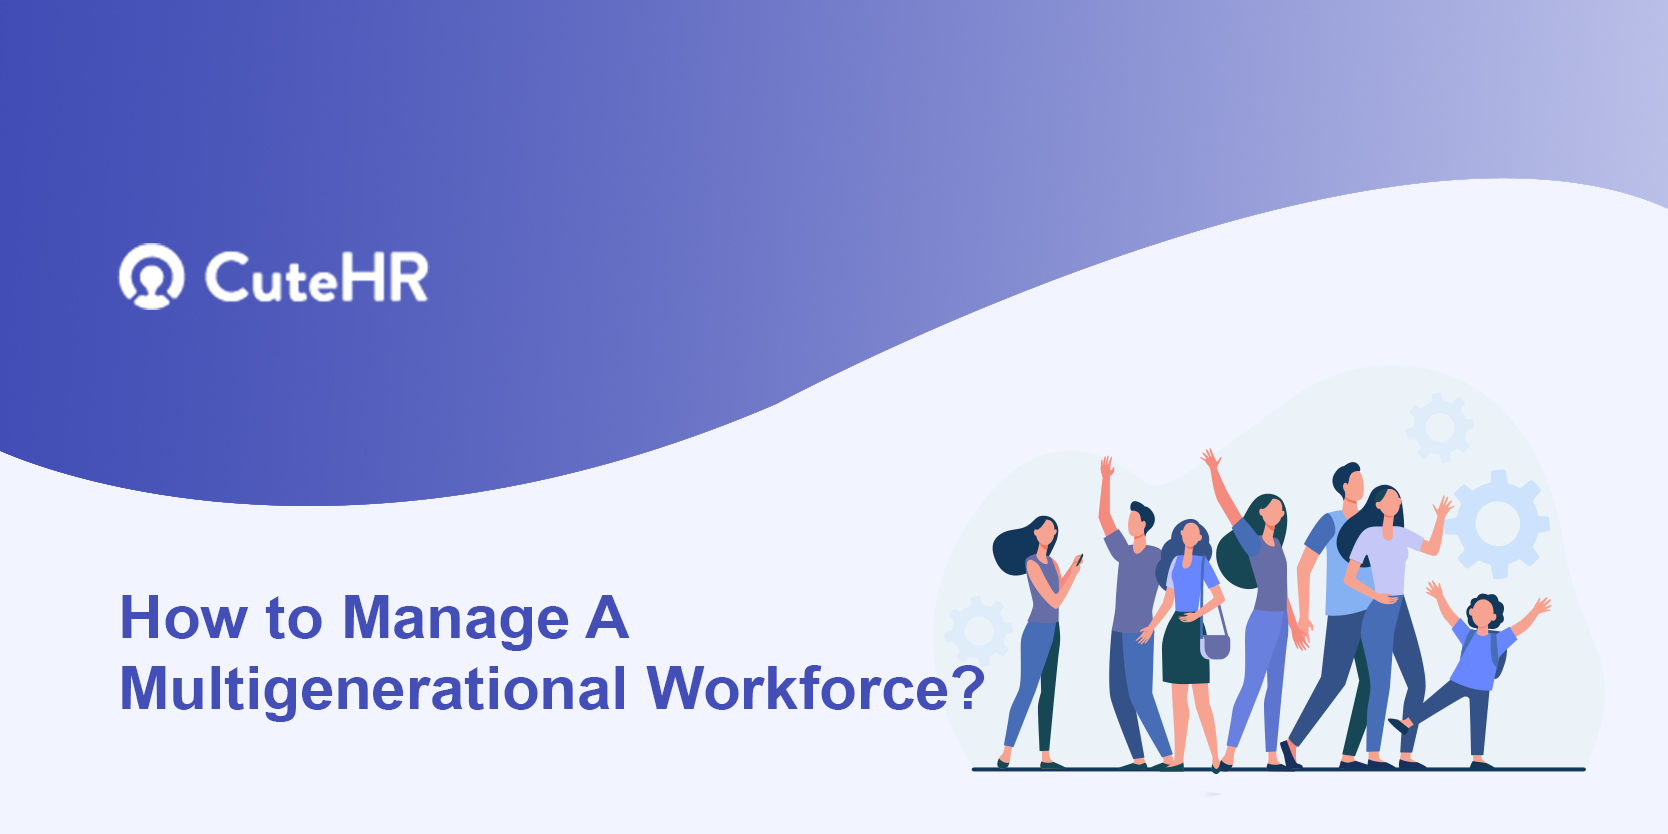 How to Manage A Multigenerational Workforce?